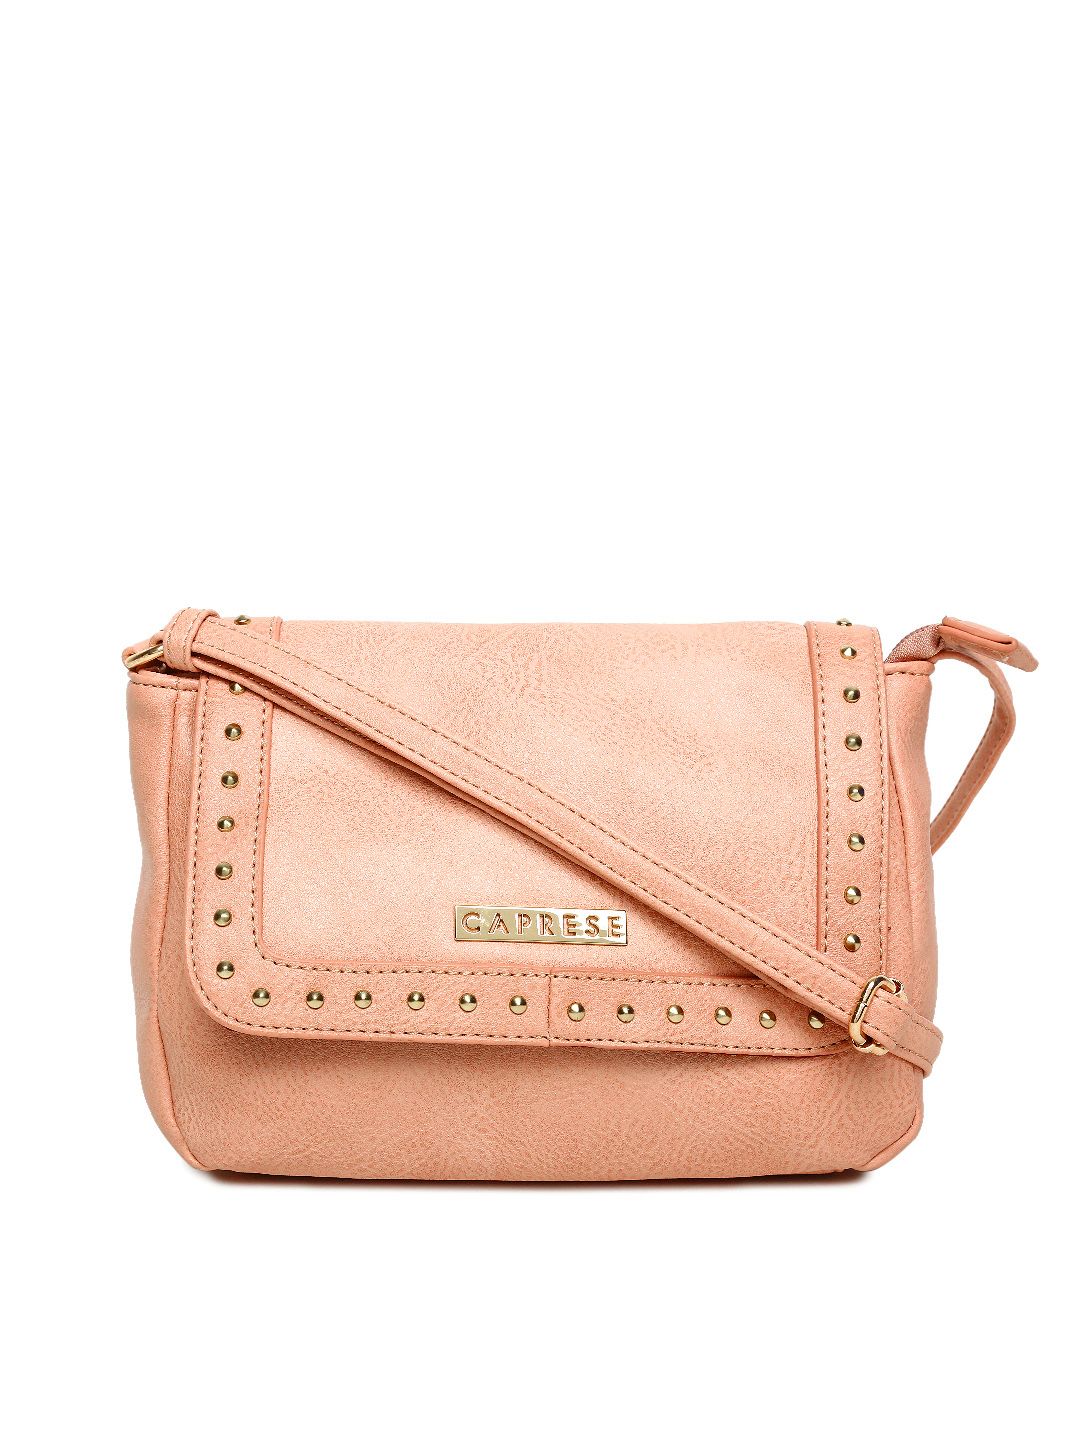 Caprese Pink Solid Sling Bag Price in India